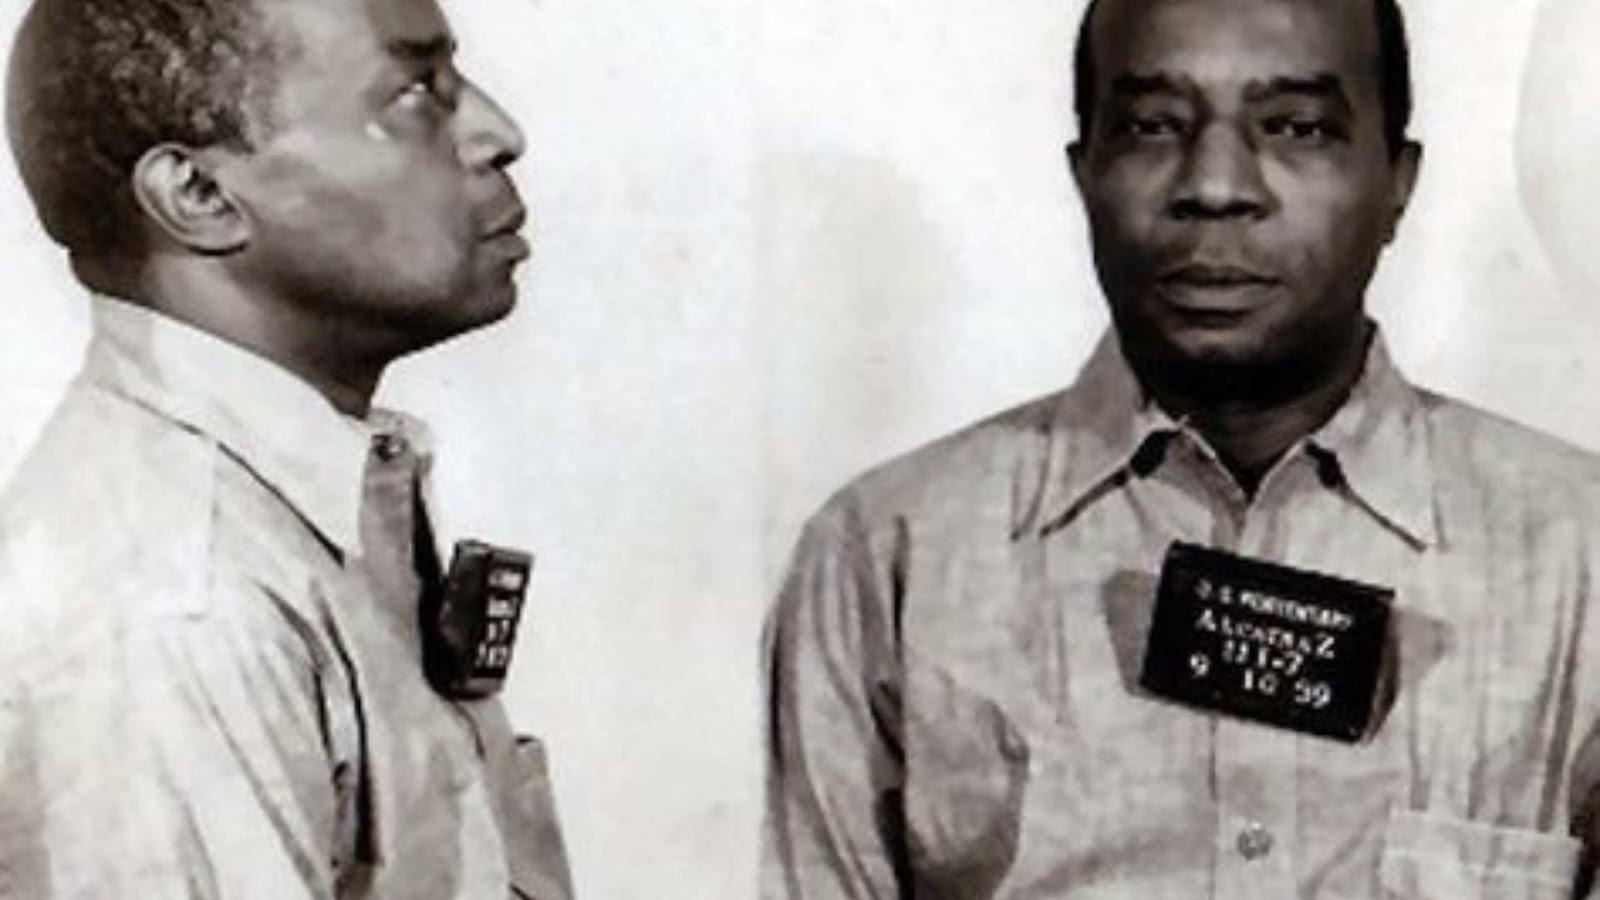 Early Life and Career of Bumpy Johnson